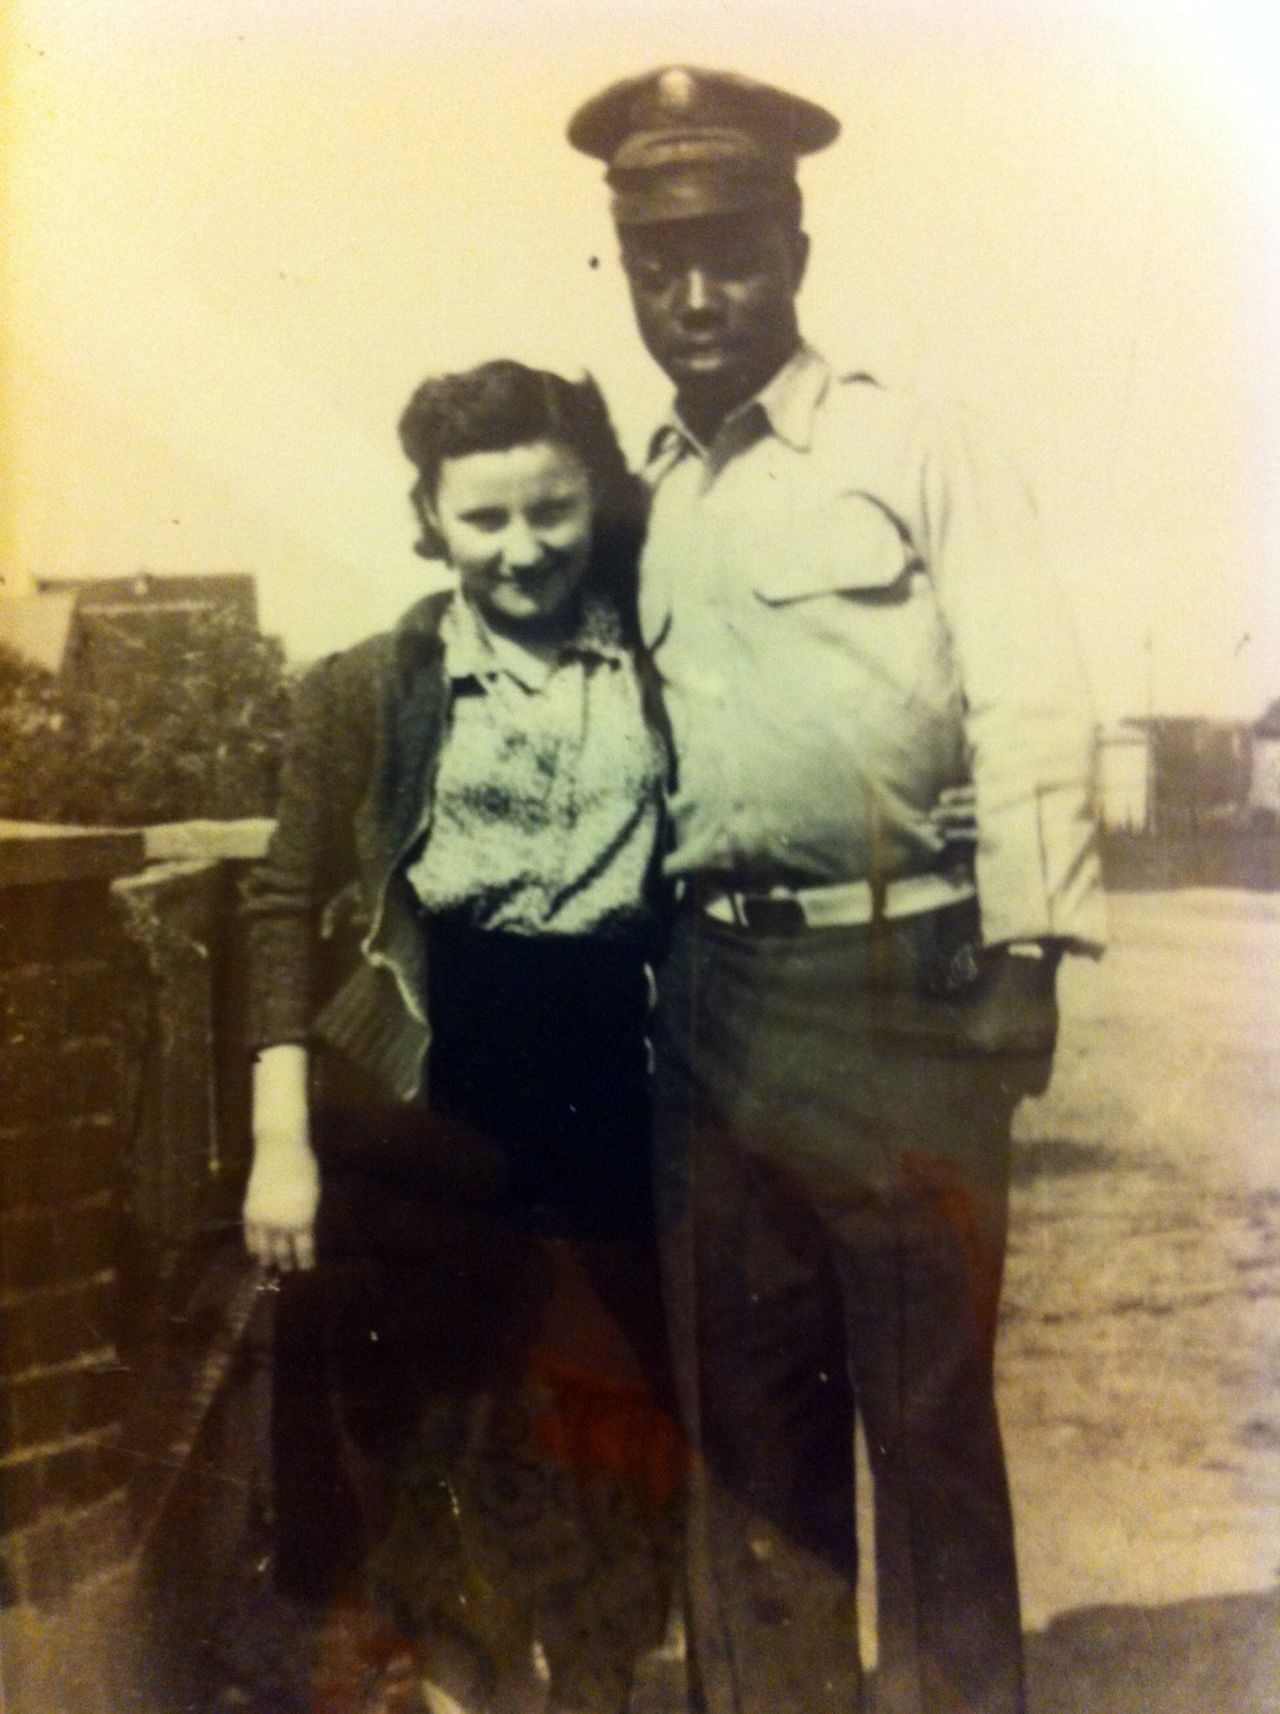 Cain now works as a search consultant to help other 'brown babies' find their biological families. One of Cain's current open search cases involves a woman who is searching for her father. Eddie Thomas is believed to have been from New York or Baltimore, and is pictured here in 1954 in Mannheim, Germany with the client's mother, Irmgard Dieter-Thomas. 